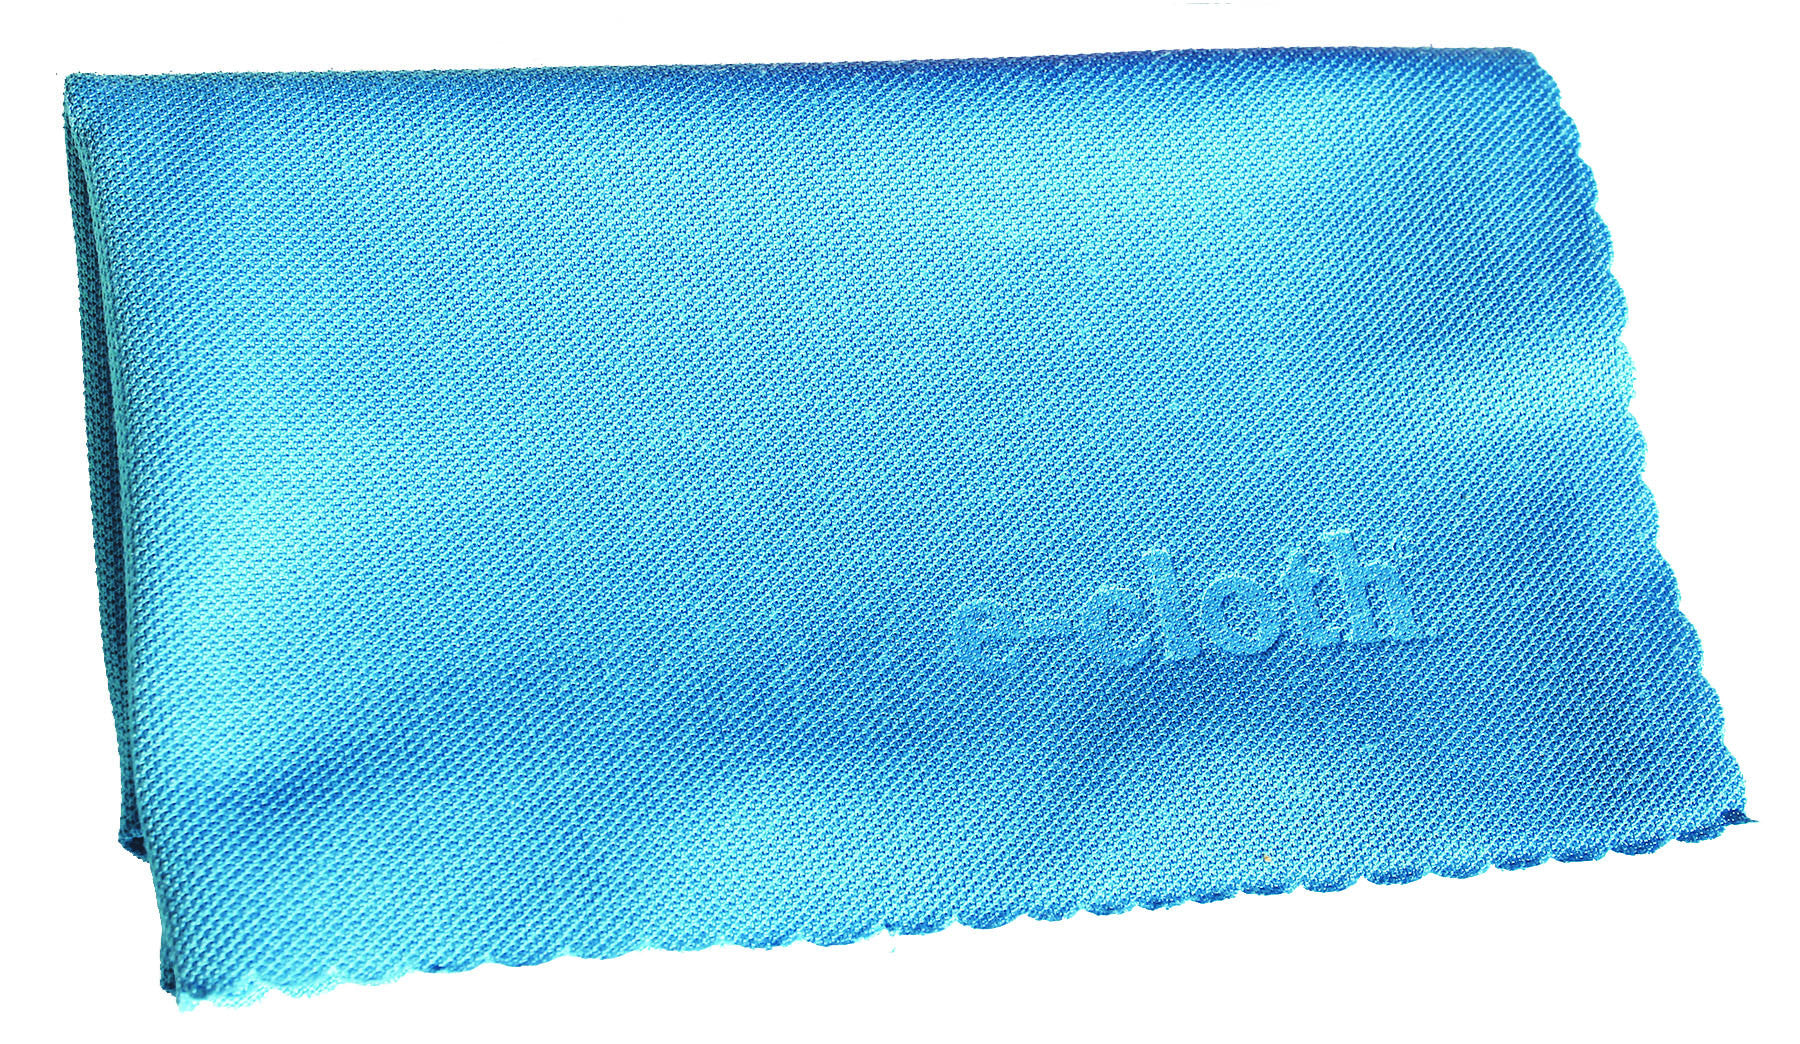 For the perfect finish on glass and any shiny surface. This microfiber cloth is designed to be used dry on a dampened shiny surface (sprayed with water from a spritzer) to remove everyday grease and grime. Leaves a perfect streak-free, smear-free and lint-free finish on glass and all shiny surfaces using just water.